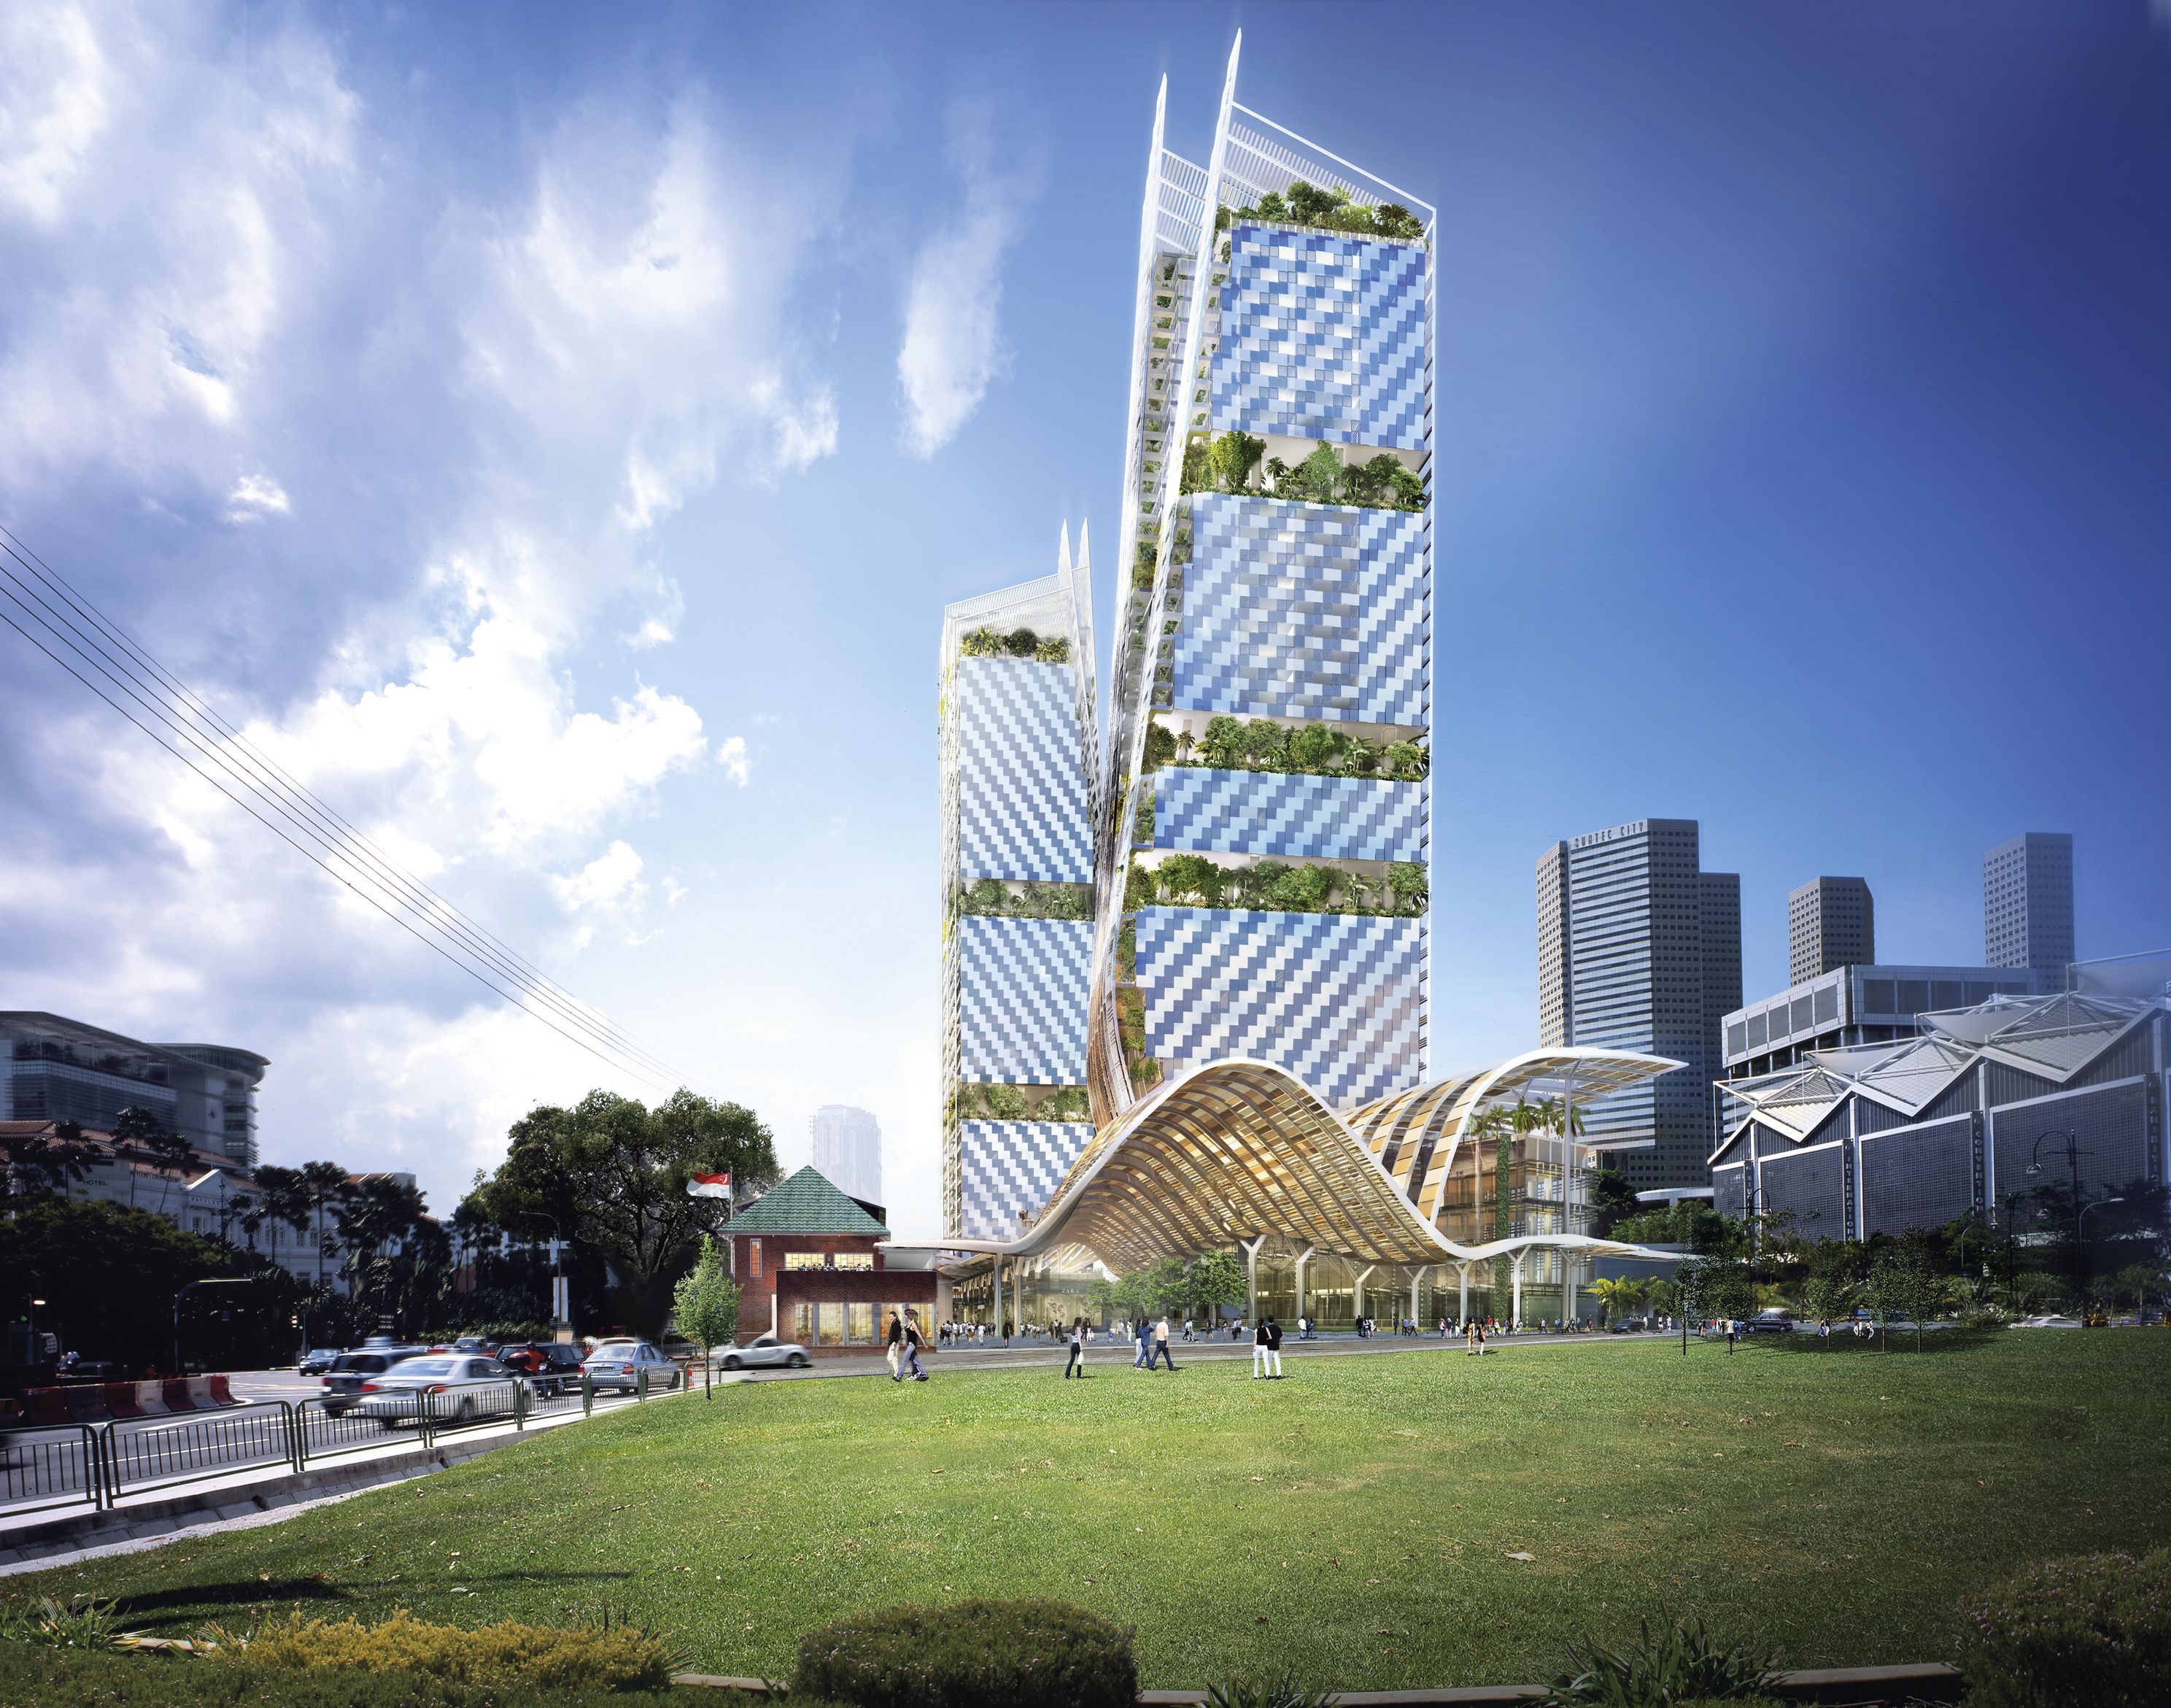 When it comes to green cities, Singapore fits the bill in most ways